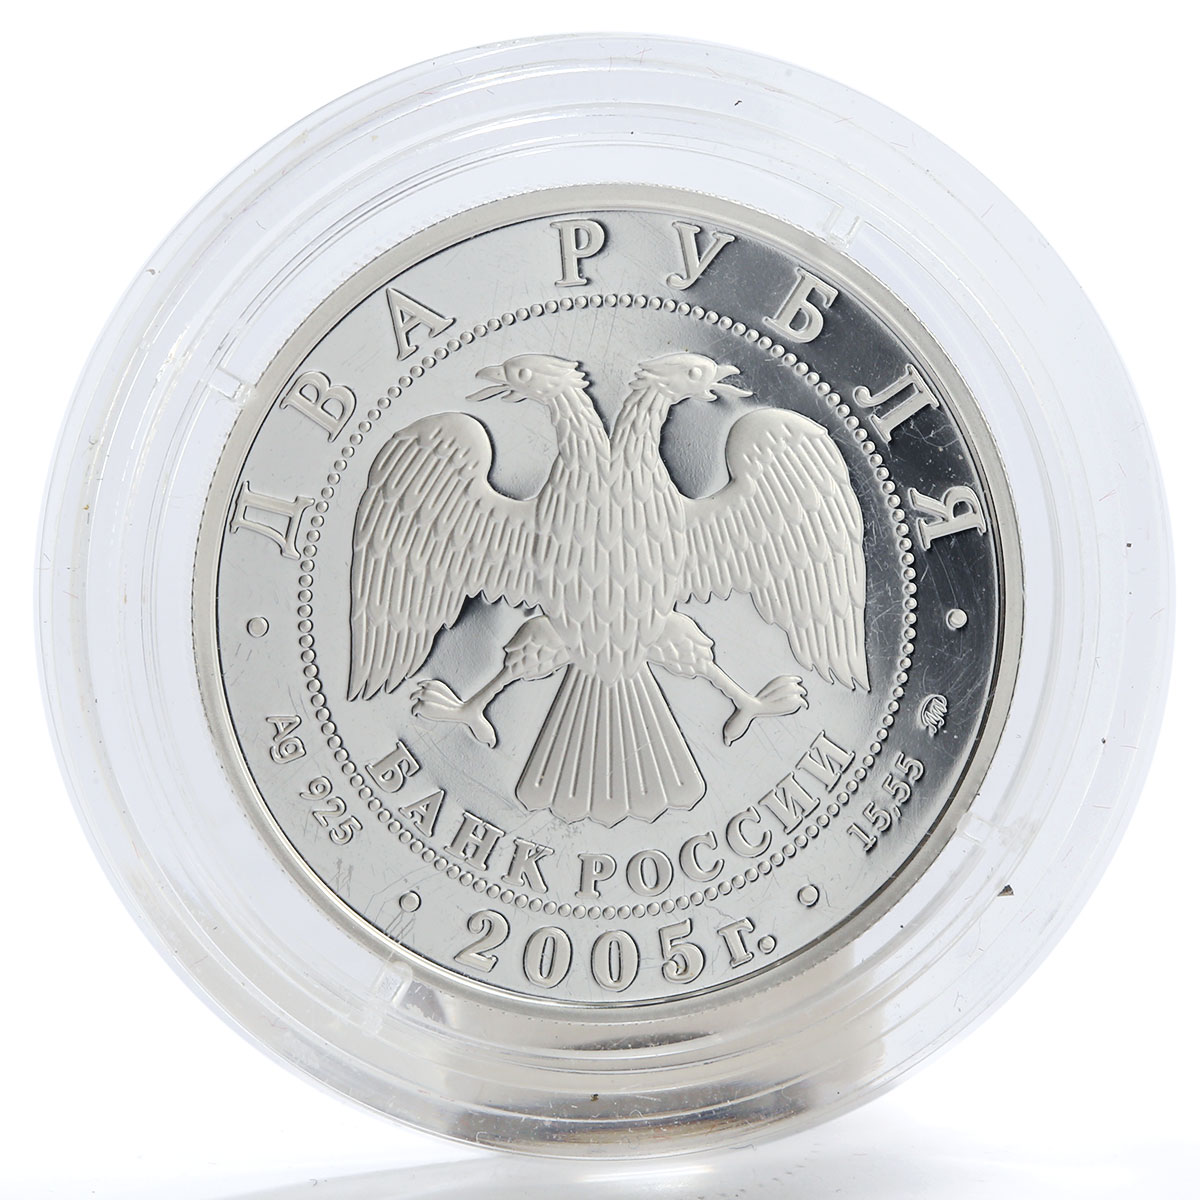 Russia 2 rubles Signs of the Zodiac Capricorn proof silver coin 2005